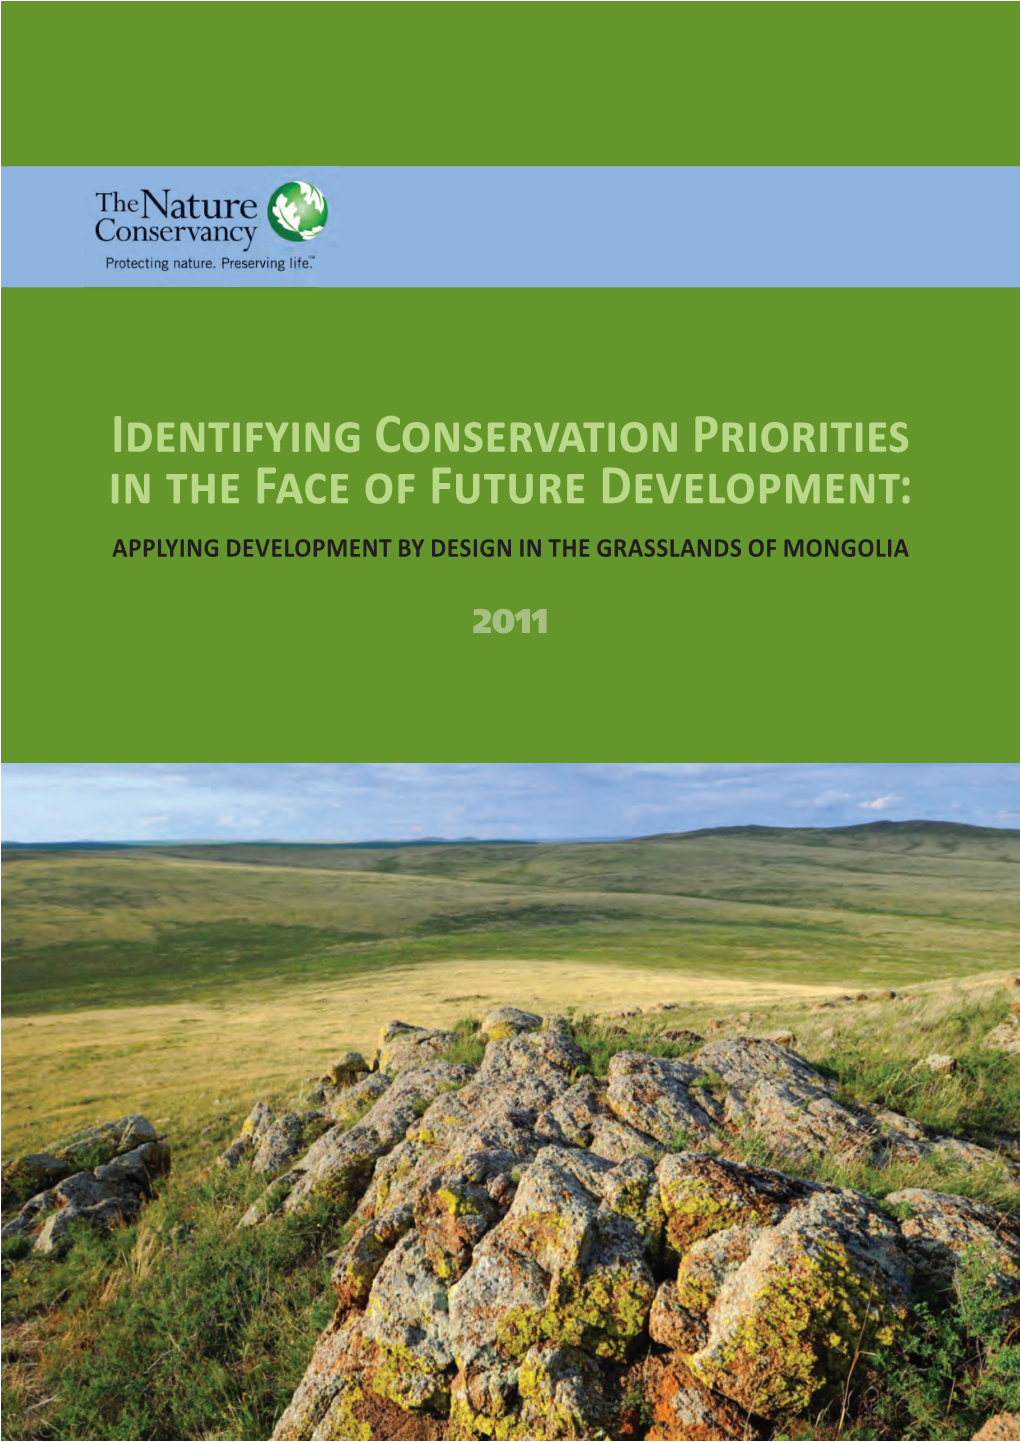 Applying Development by Design in the Grasslands of Mongolia